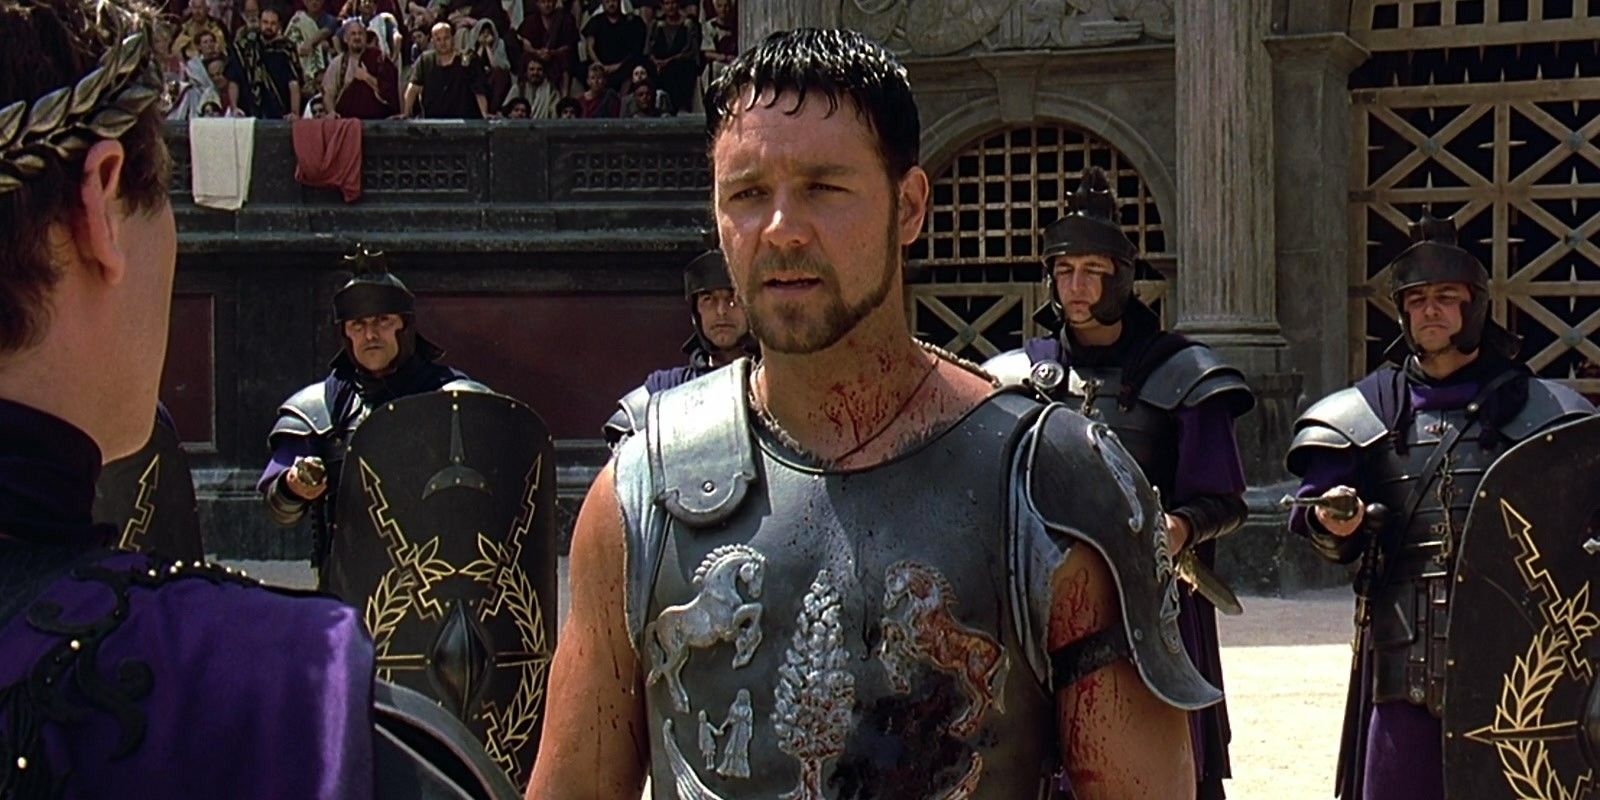 Gladiators' Legend reveals outrageous reason he's forced to wear